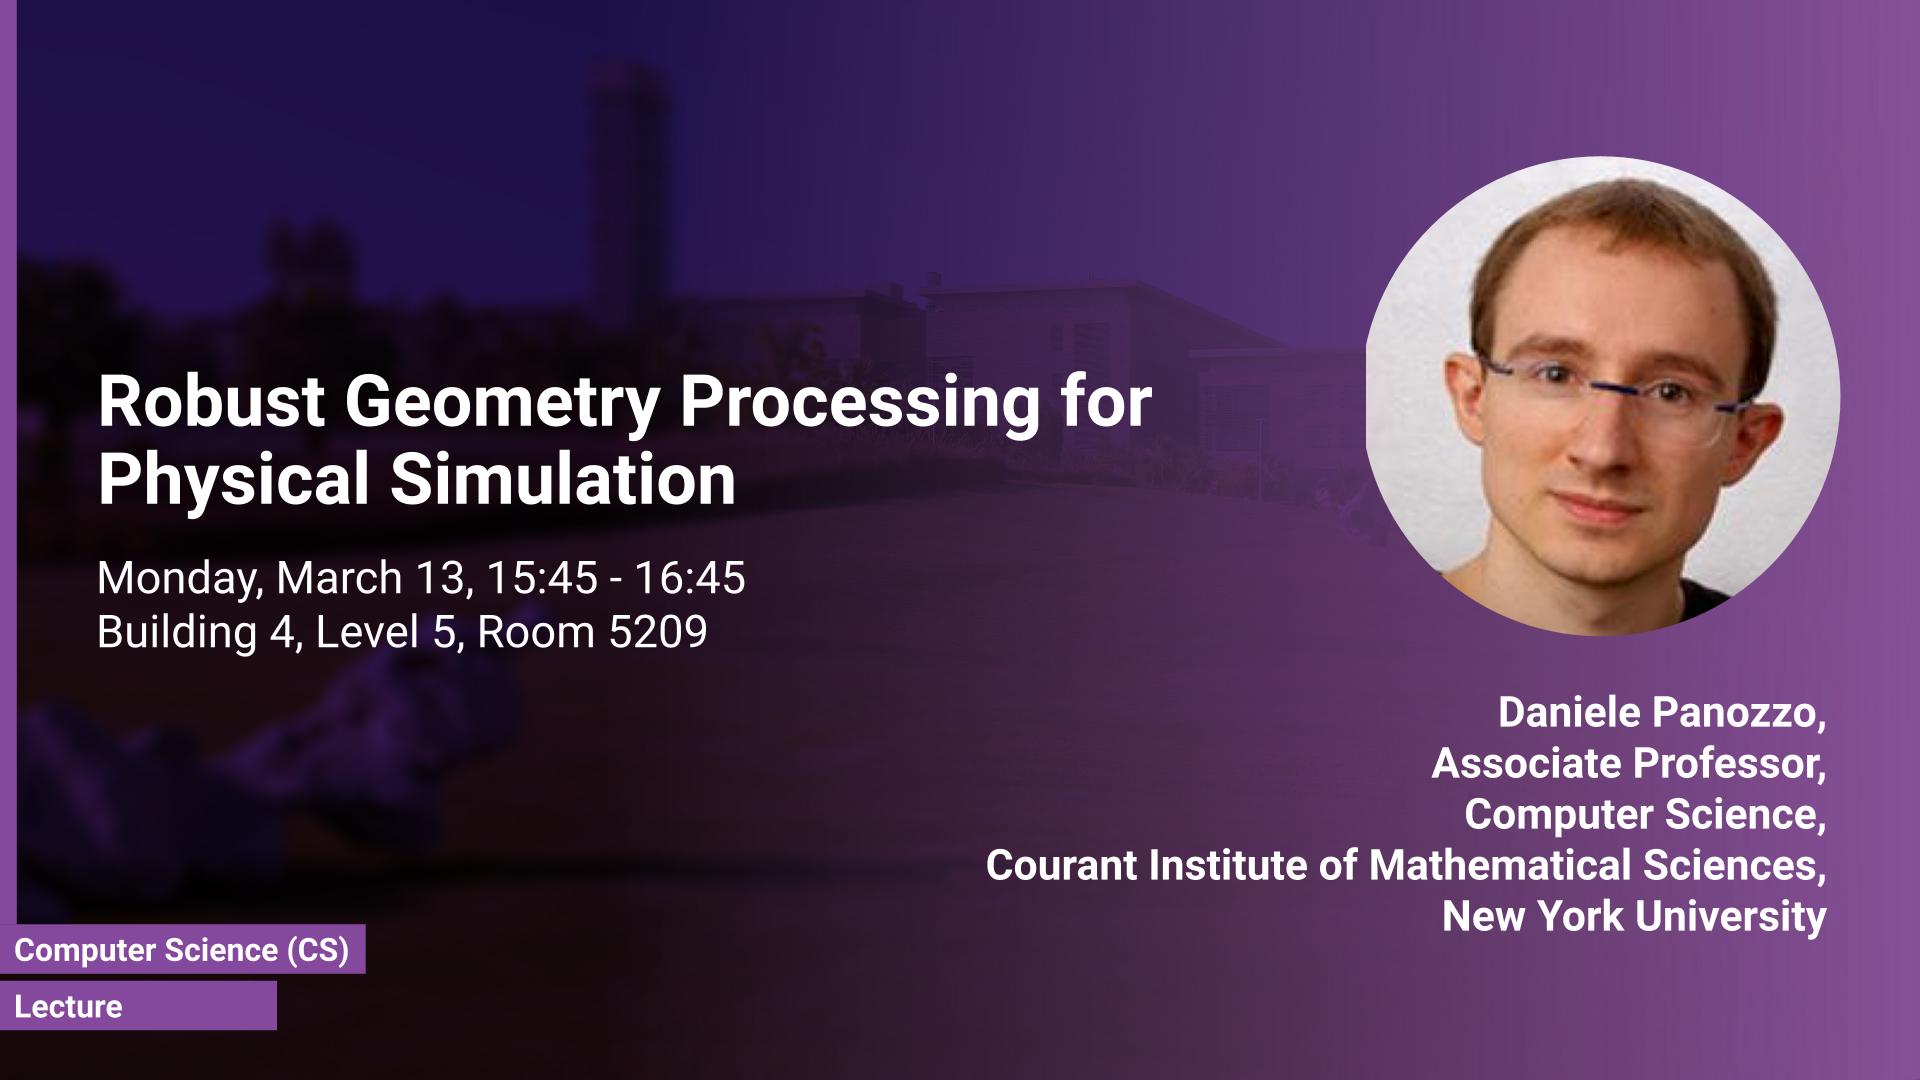 KAUST-CS-VCC-Lecture-Daniele-Panozzo-Robust-Geometry-Processing.jpg